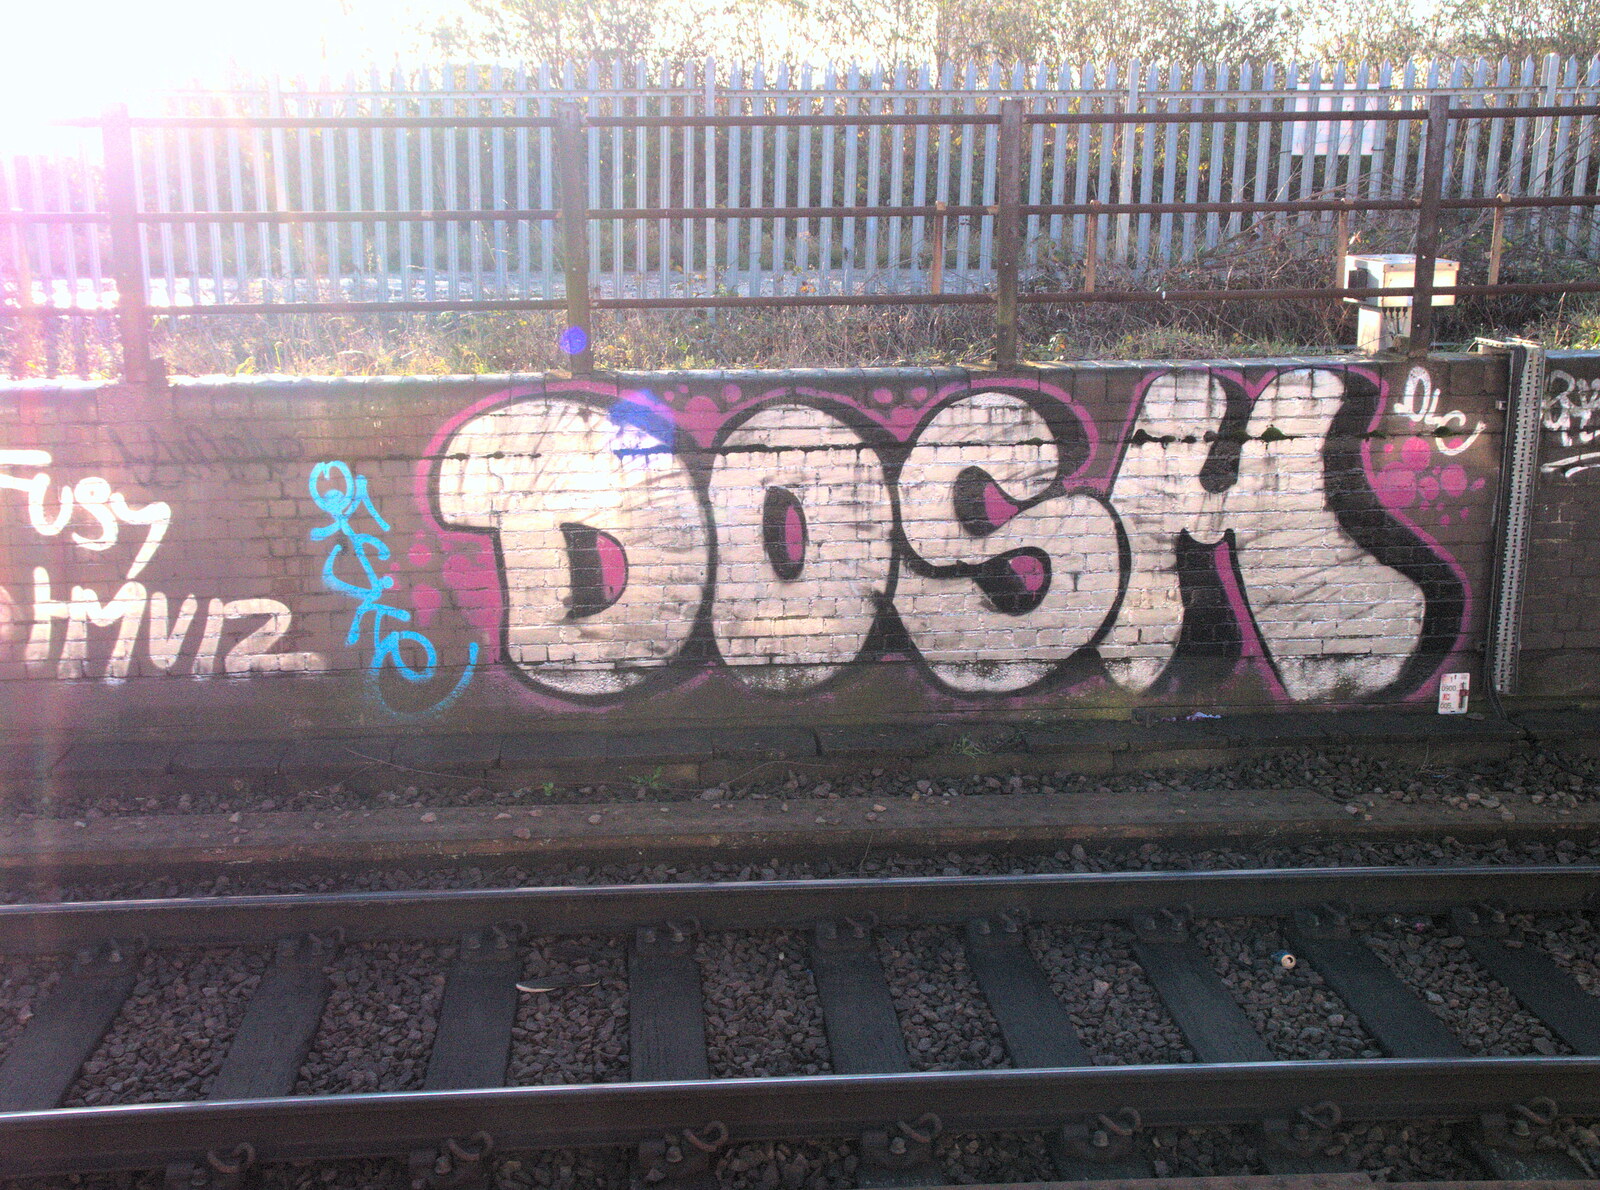 Dosh graffiti in the sun from A Work Lunch in Nandos, Bayswater Grove, West London - 20th December 2017